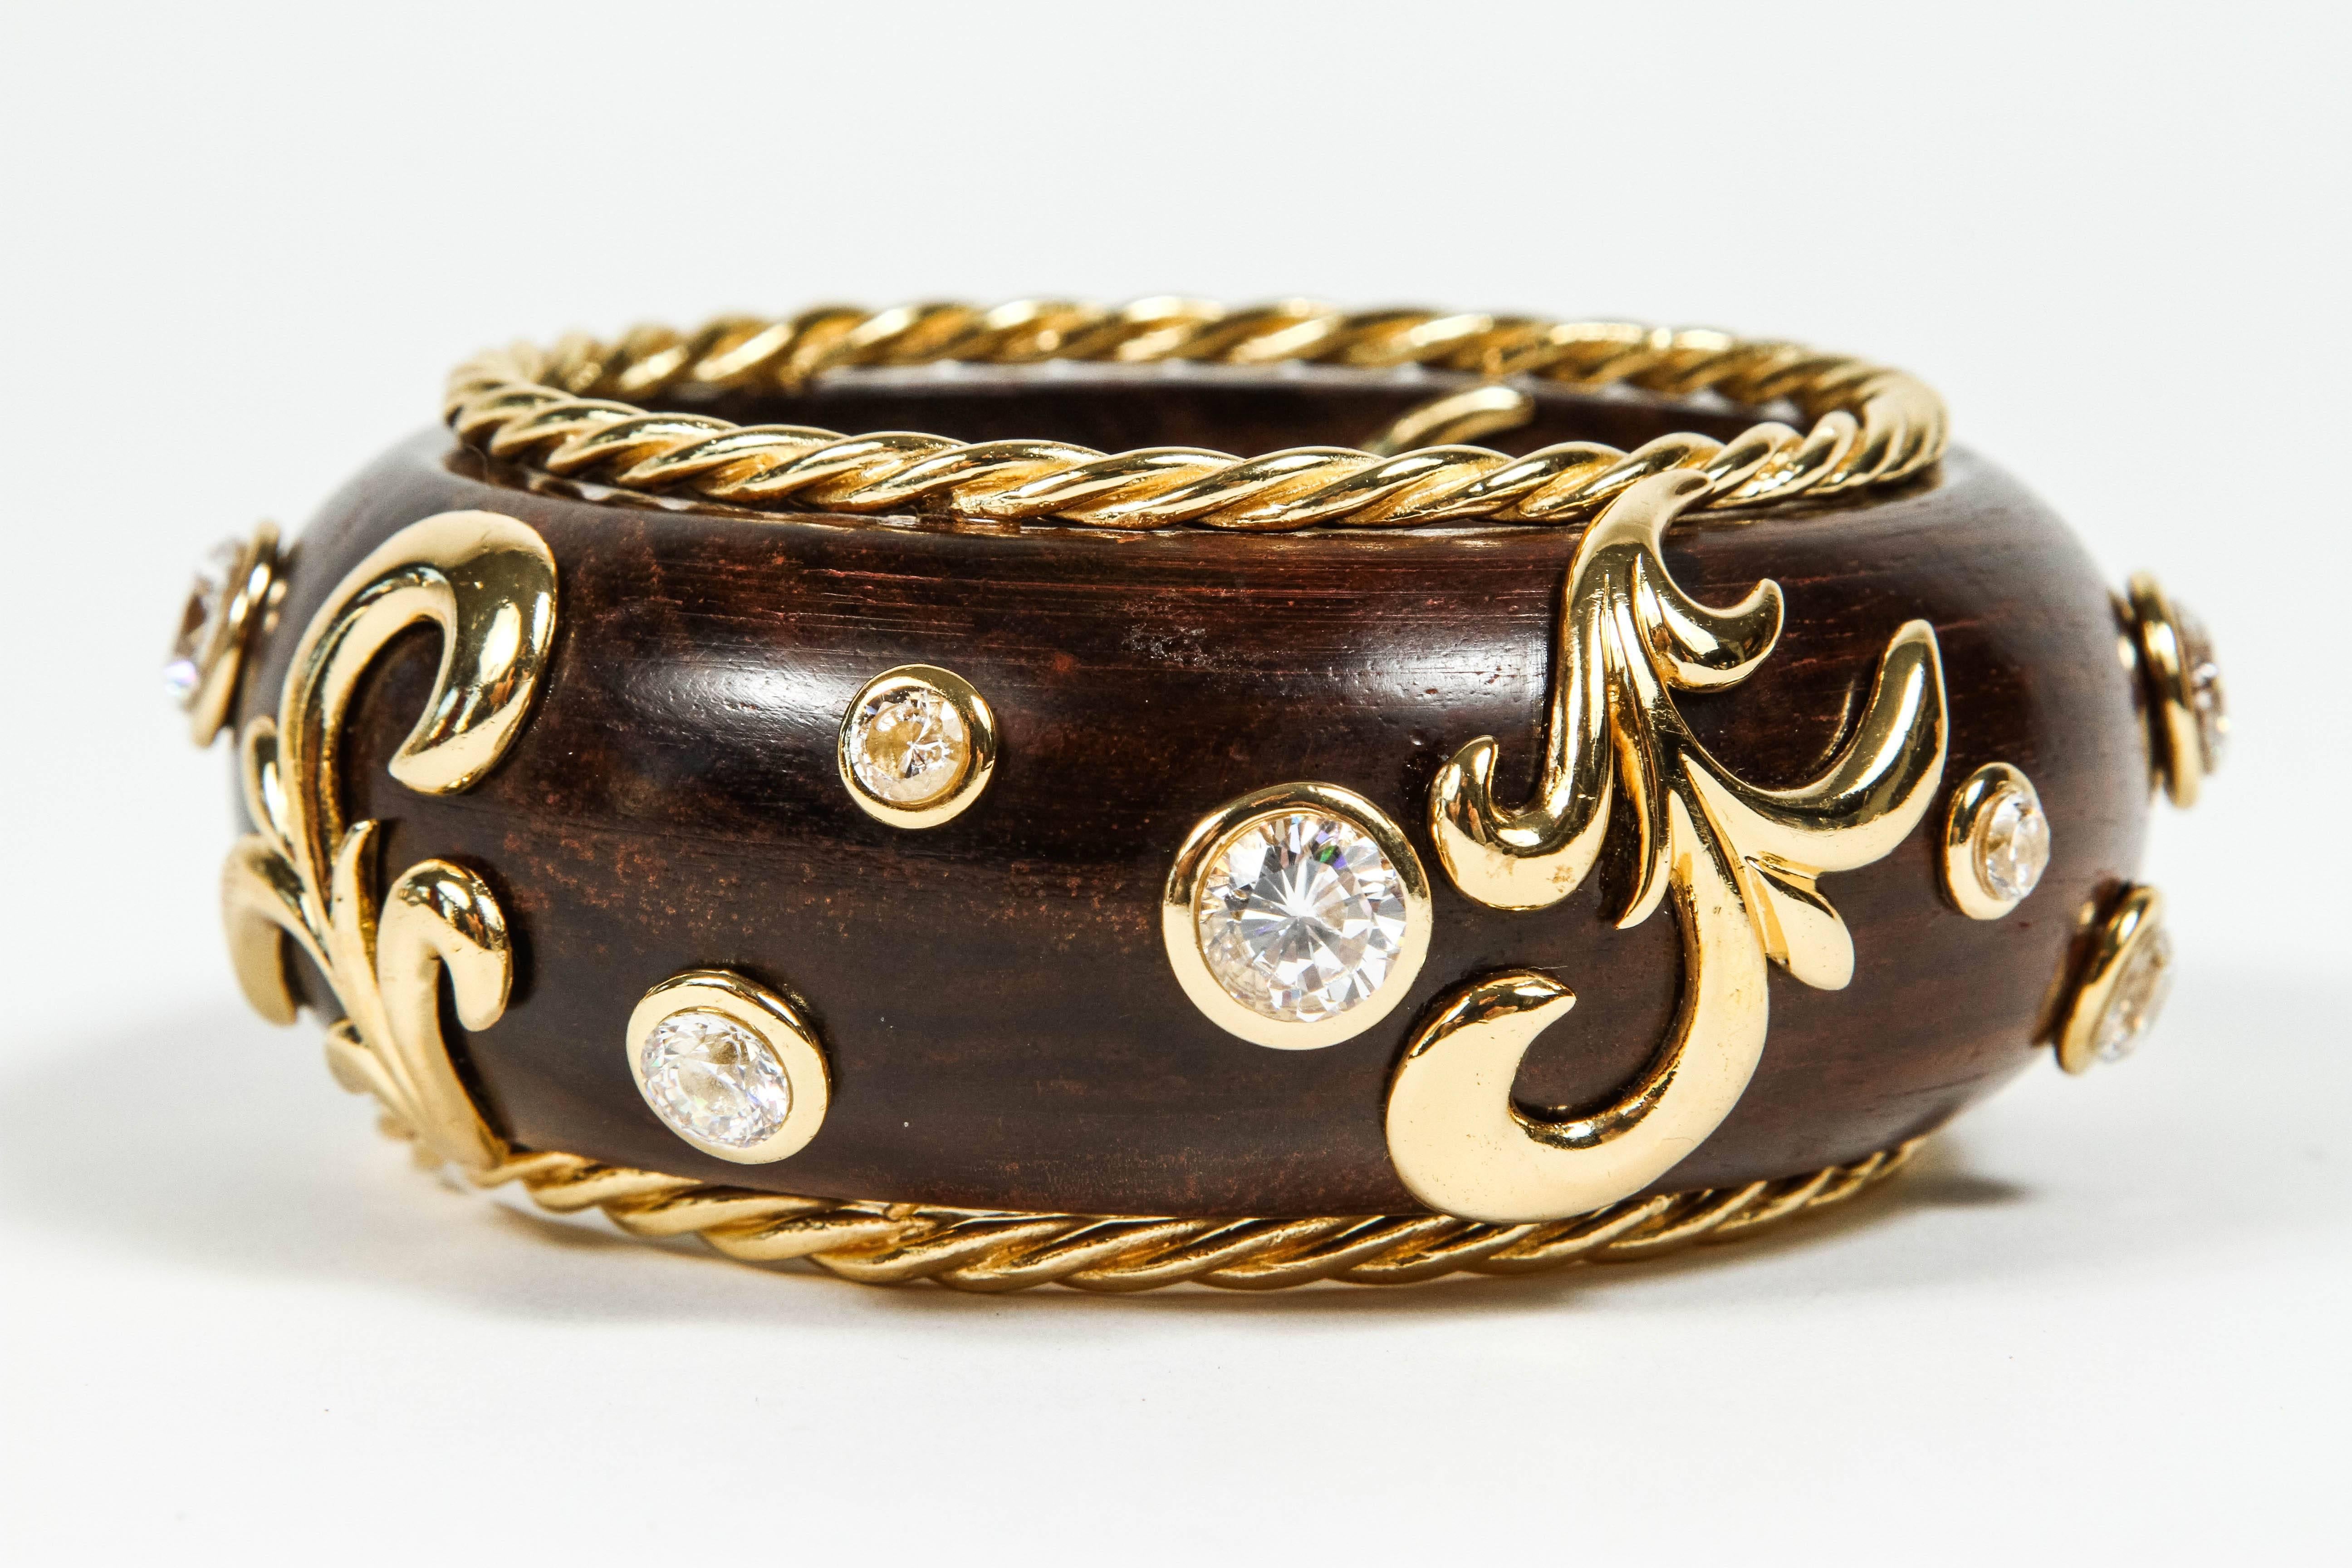 Women's Beautiful Gilt Metal Rhinestone and Wood Bangle by Dominique Aurientis